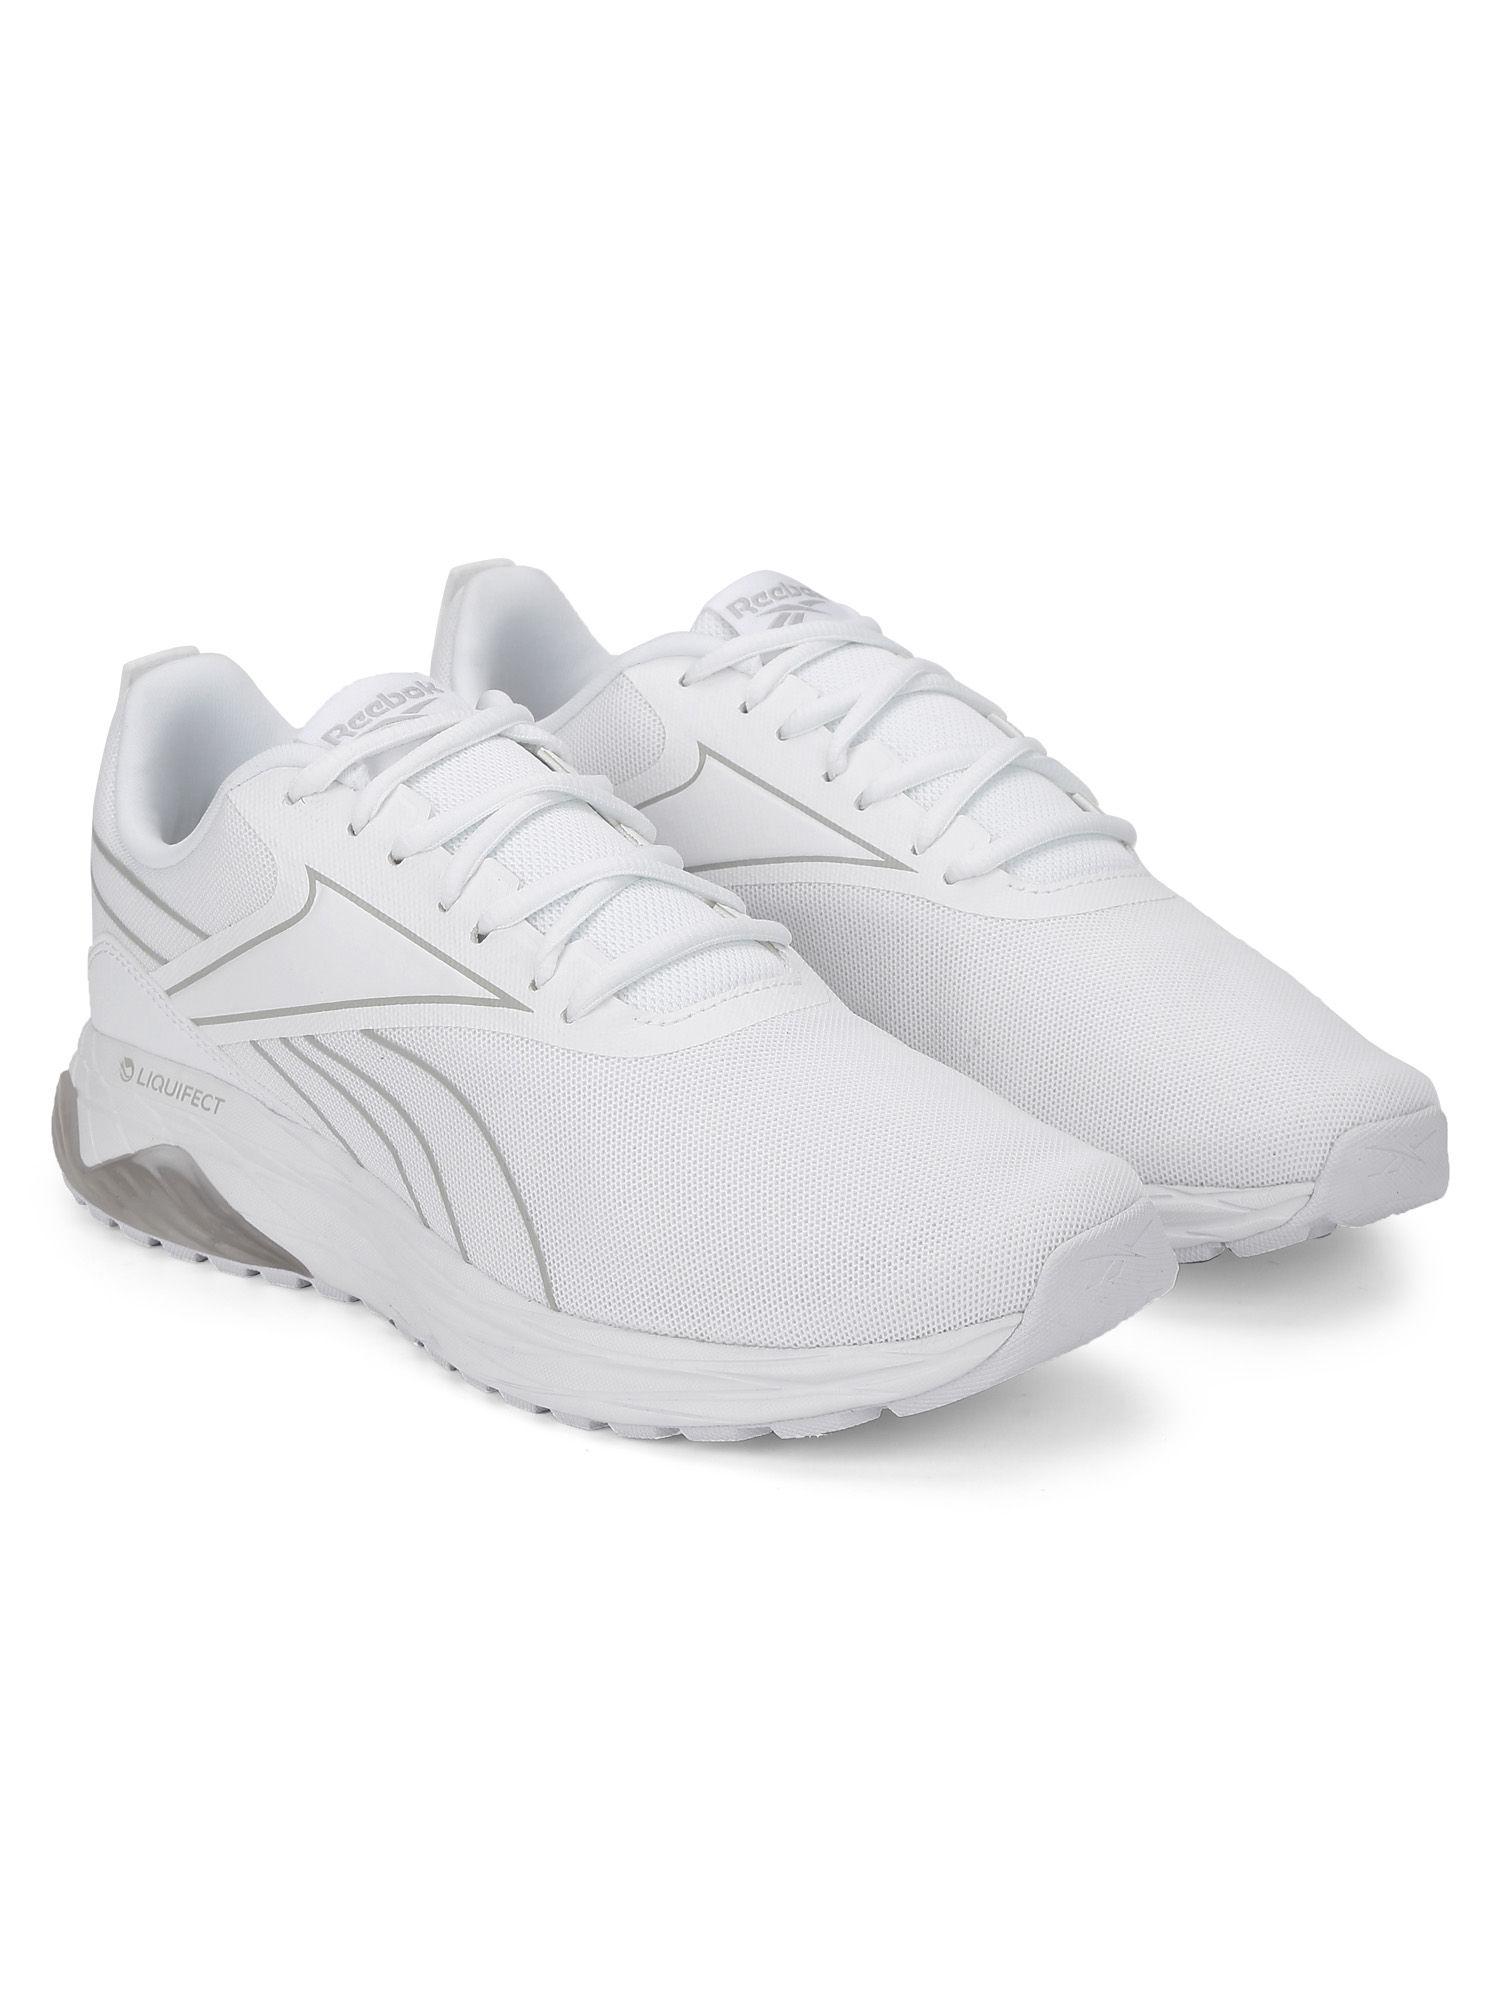 liquifect-180-2.0-white-running-shoes